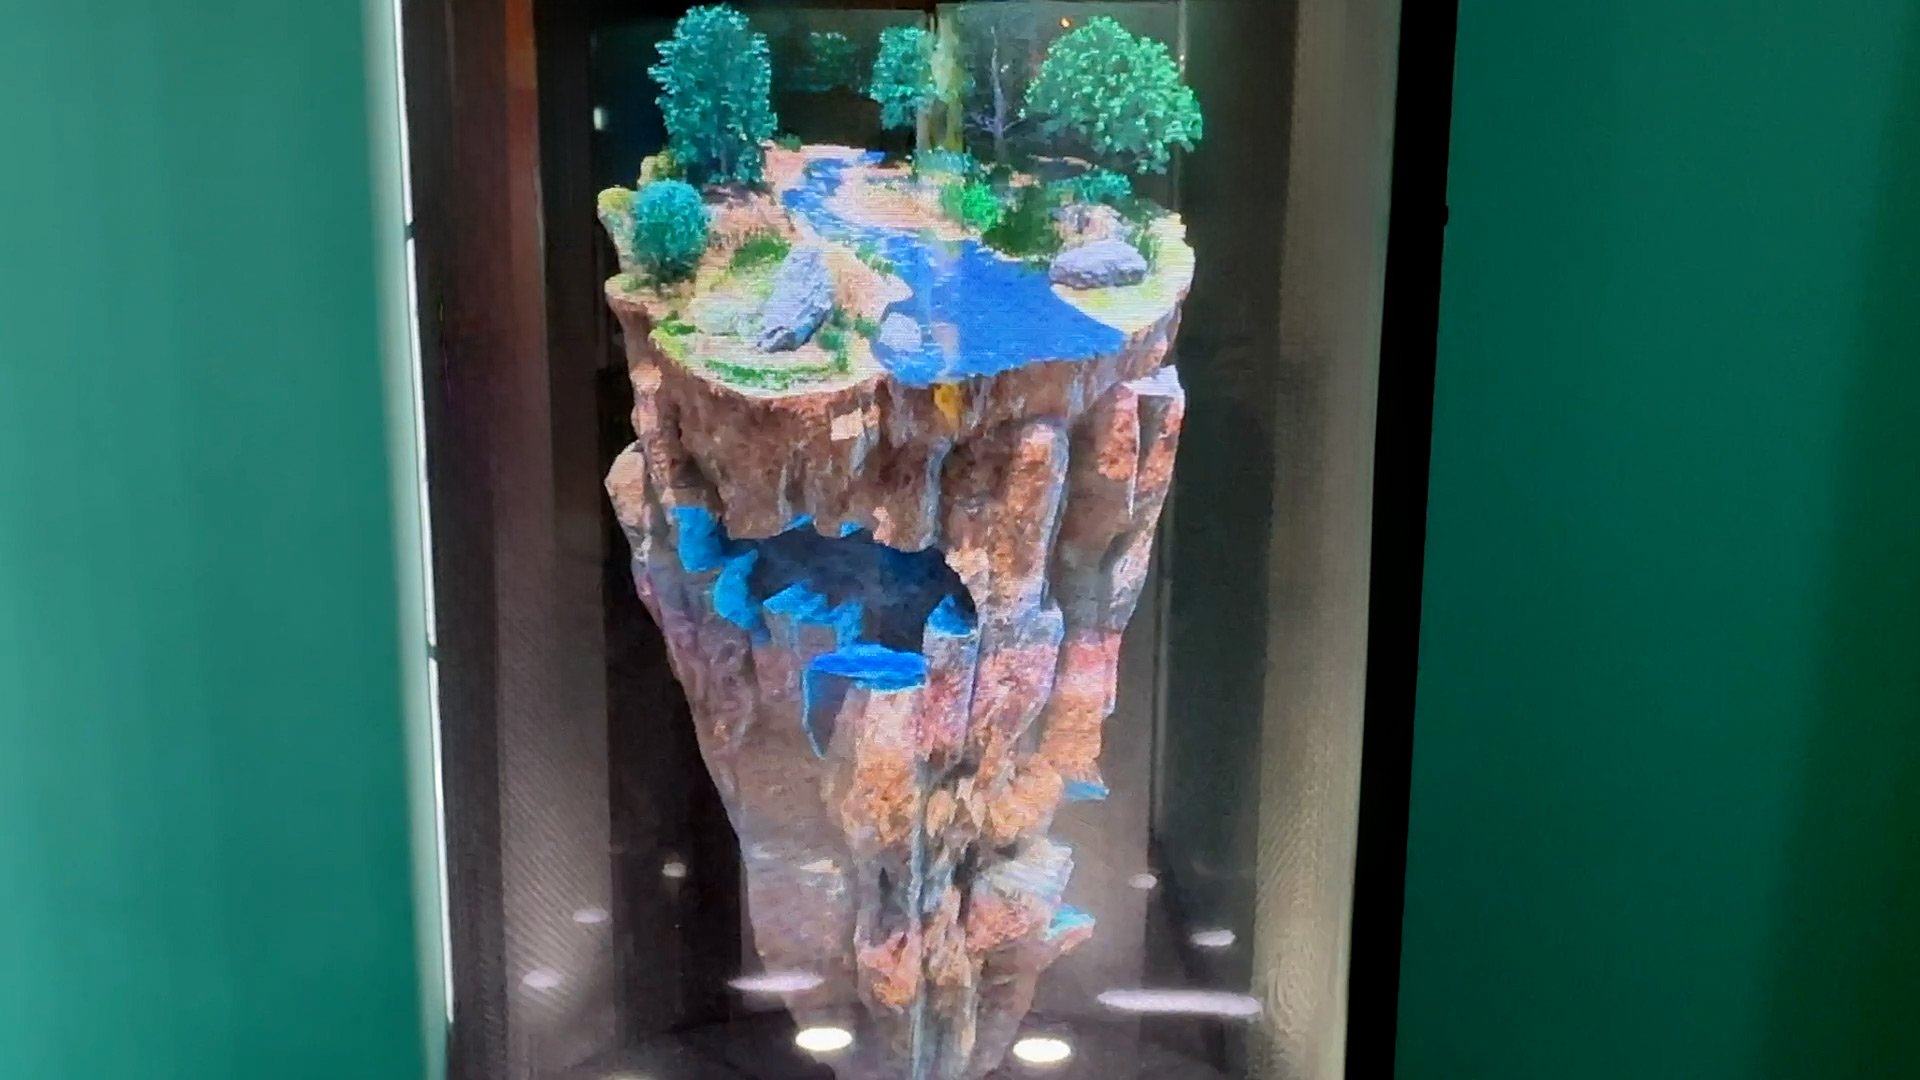    The Go Fish Education Center's HoloTube offers a window into the intricate formations of our planet's water cycle.   